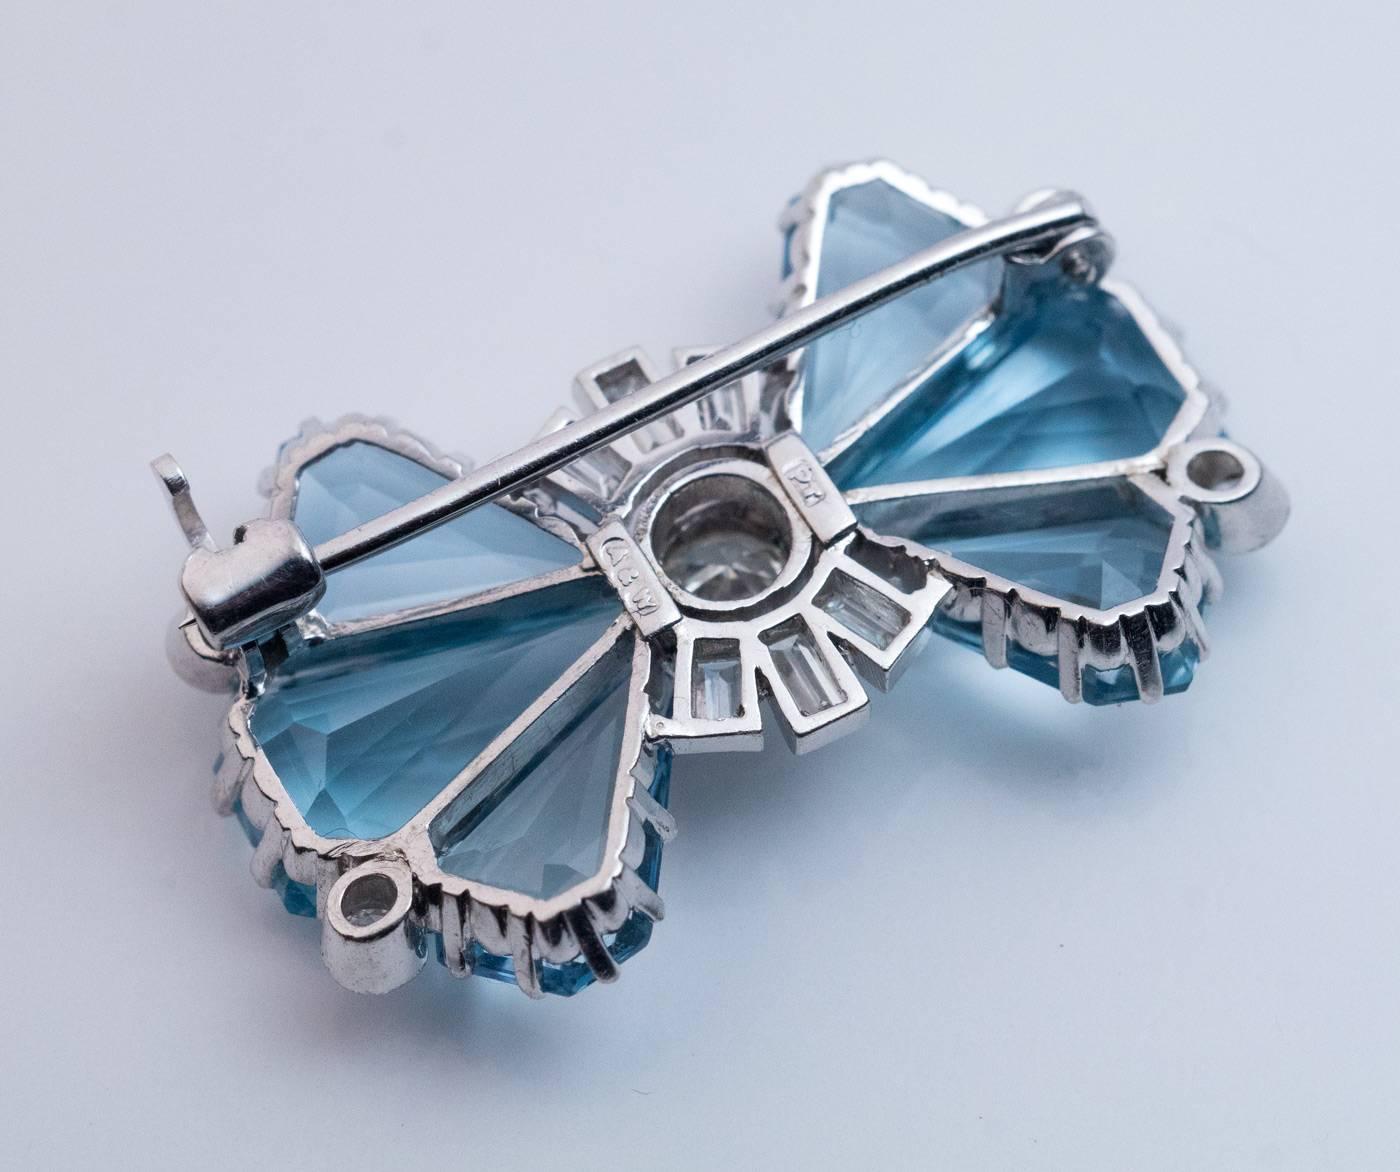 Circa 1935
A vintage platinum bow-shaped brooch / pin is set with aquamarines, round and baguette cut diamonds (H color, VS1 – SI1 clarity).

Estimated total aquamarine weight is 10 carats.
Approximate total diamond weight is 1 carat.

Width 30 mm